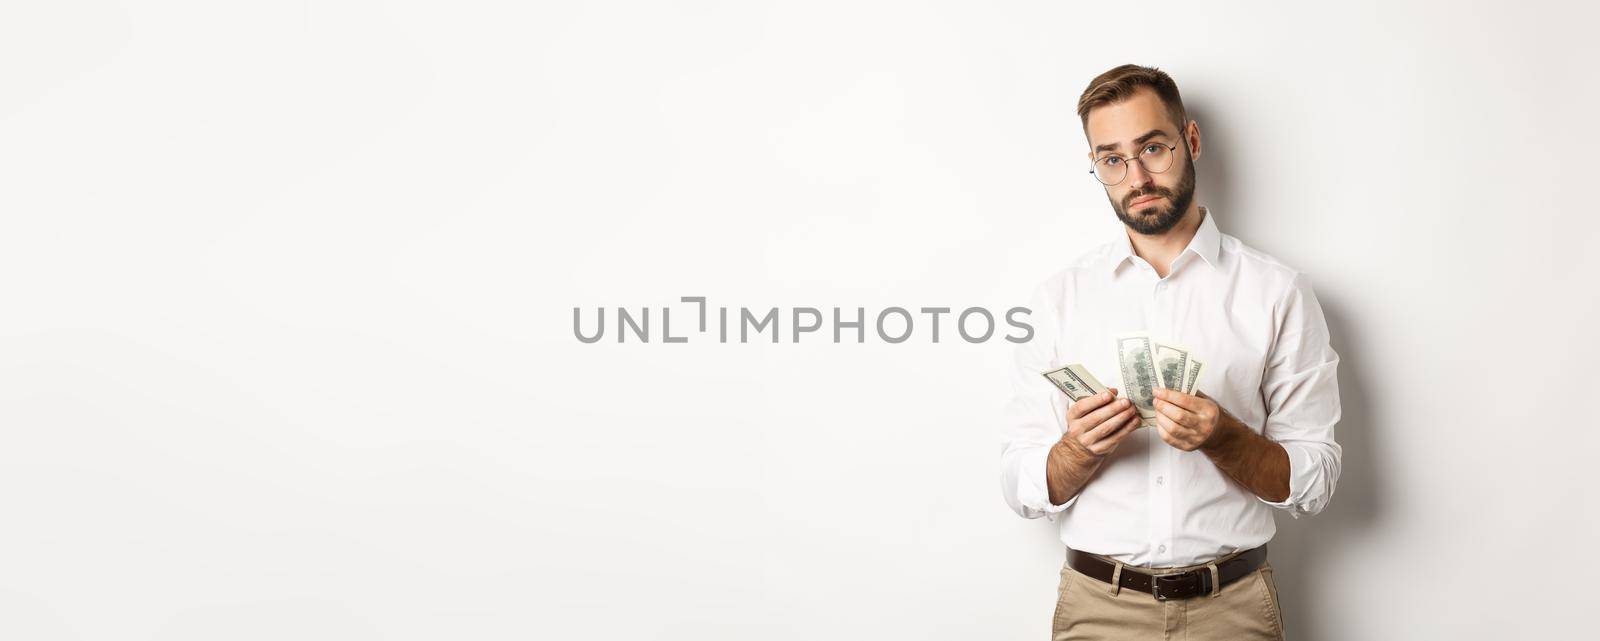 Handsome businessman counting money and looking at camera, standing serious against white background.